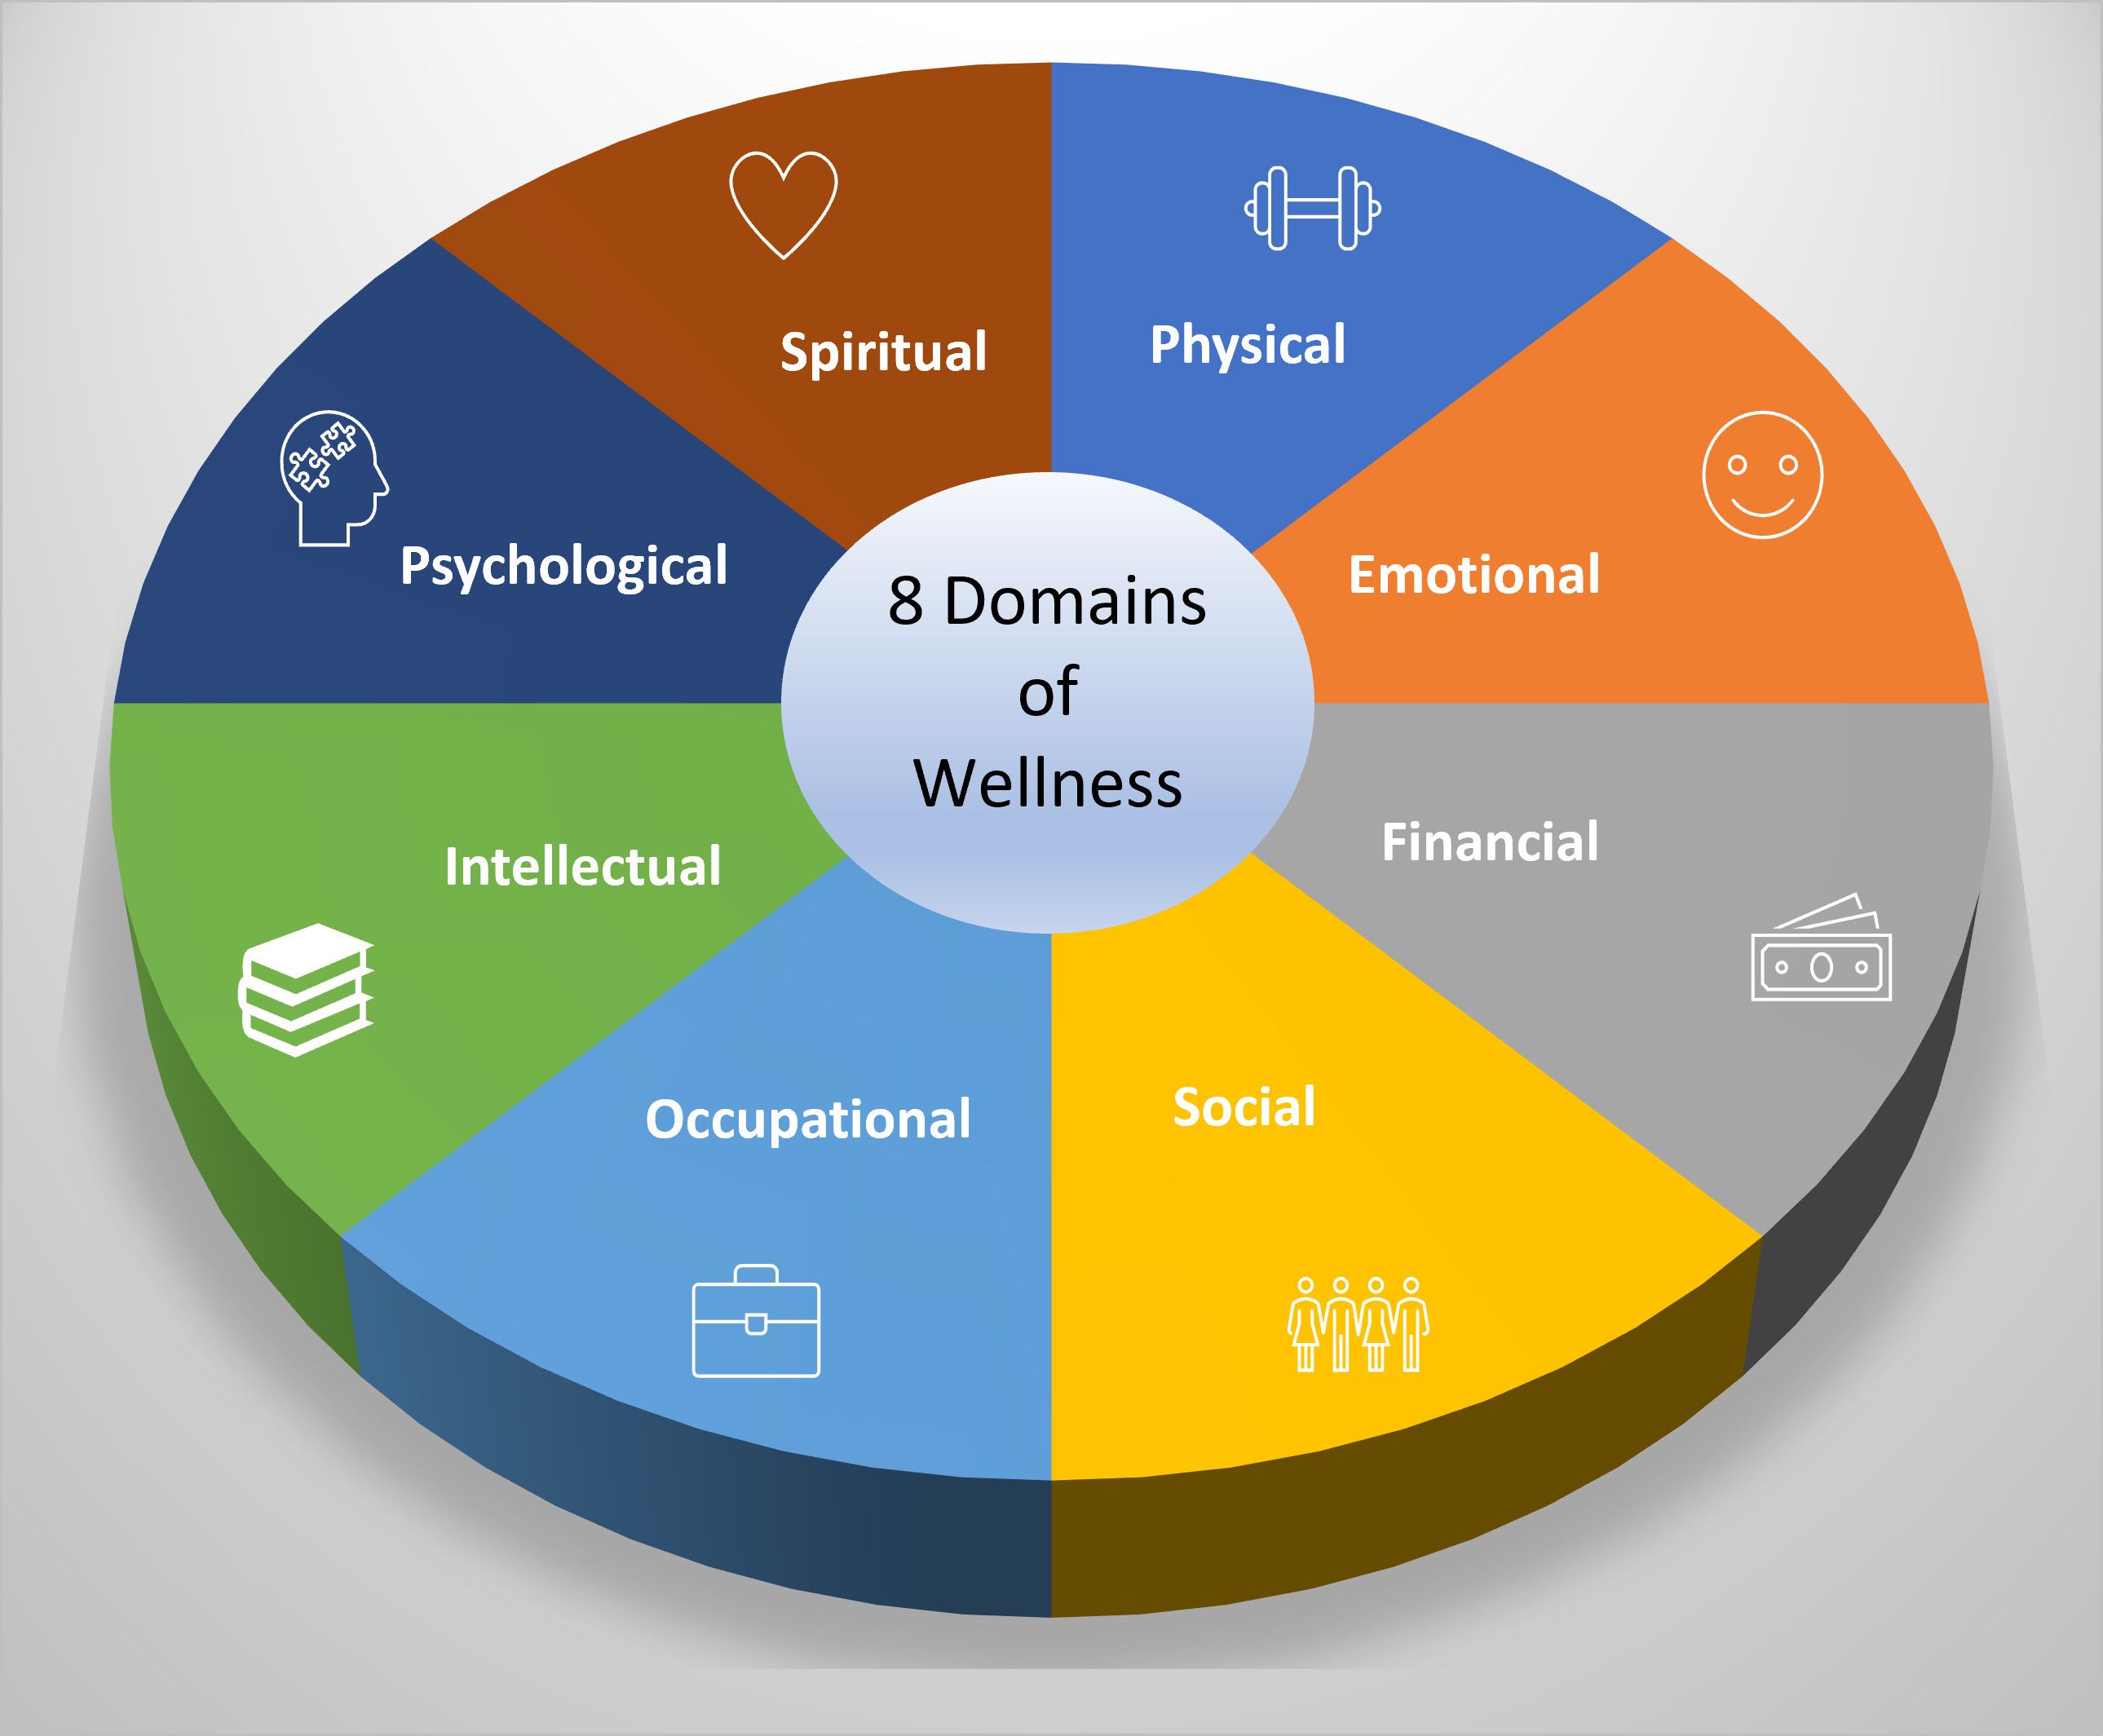 8 dimensions of wellness